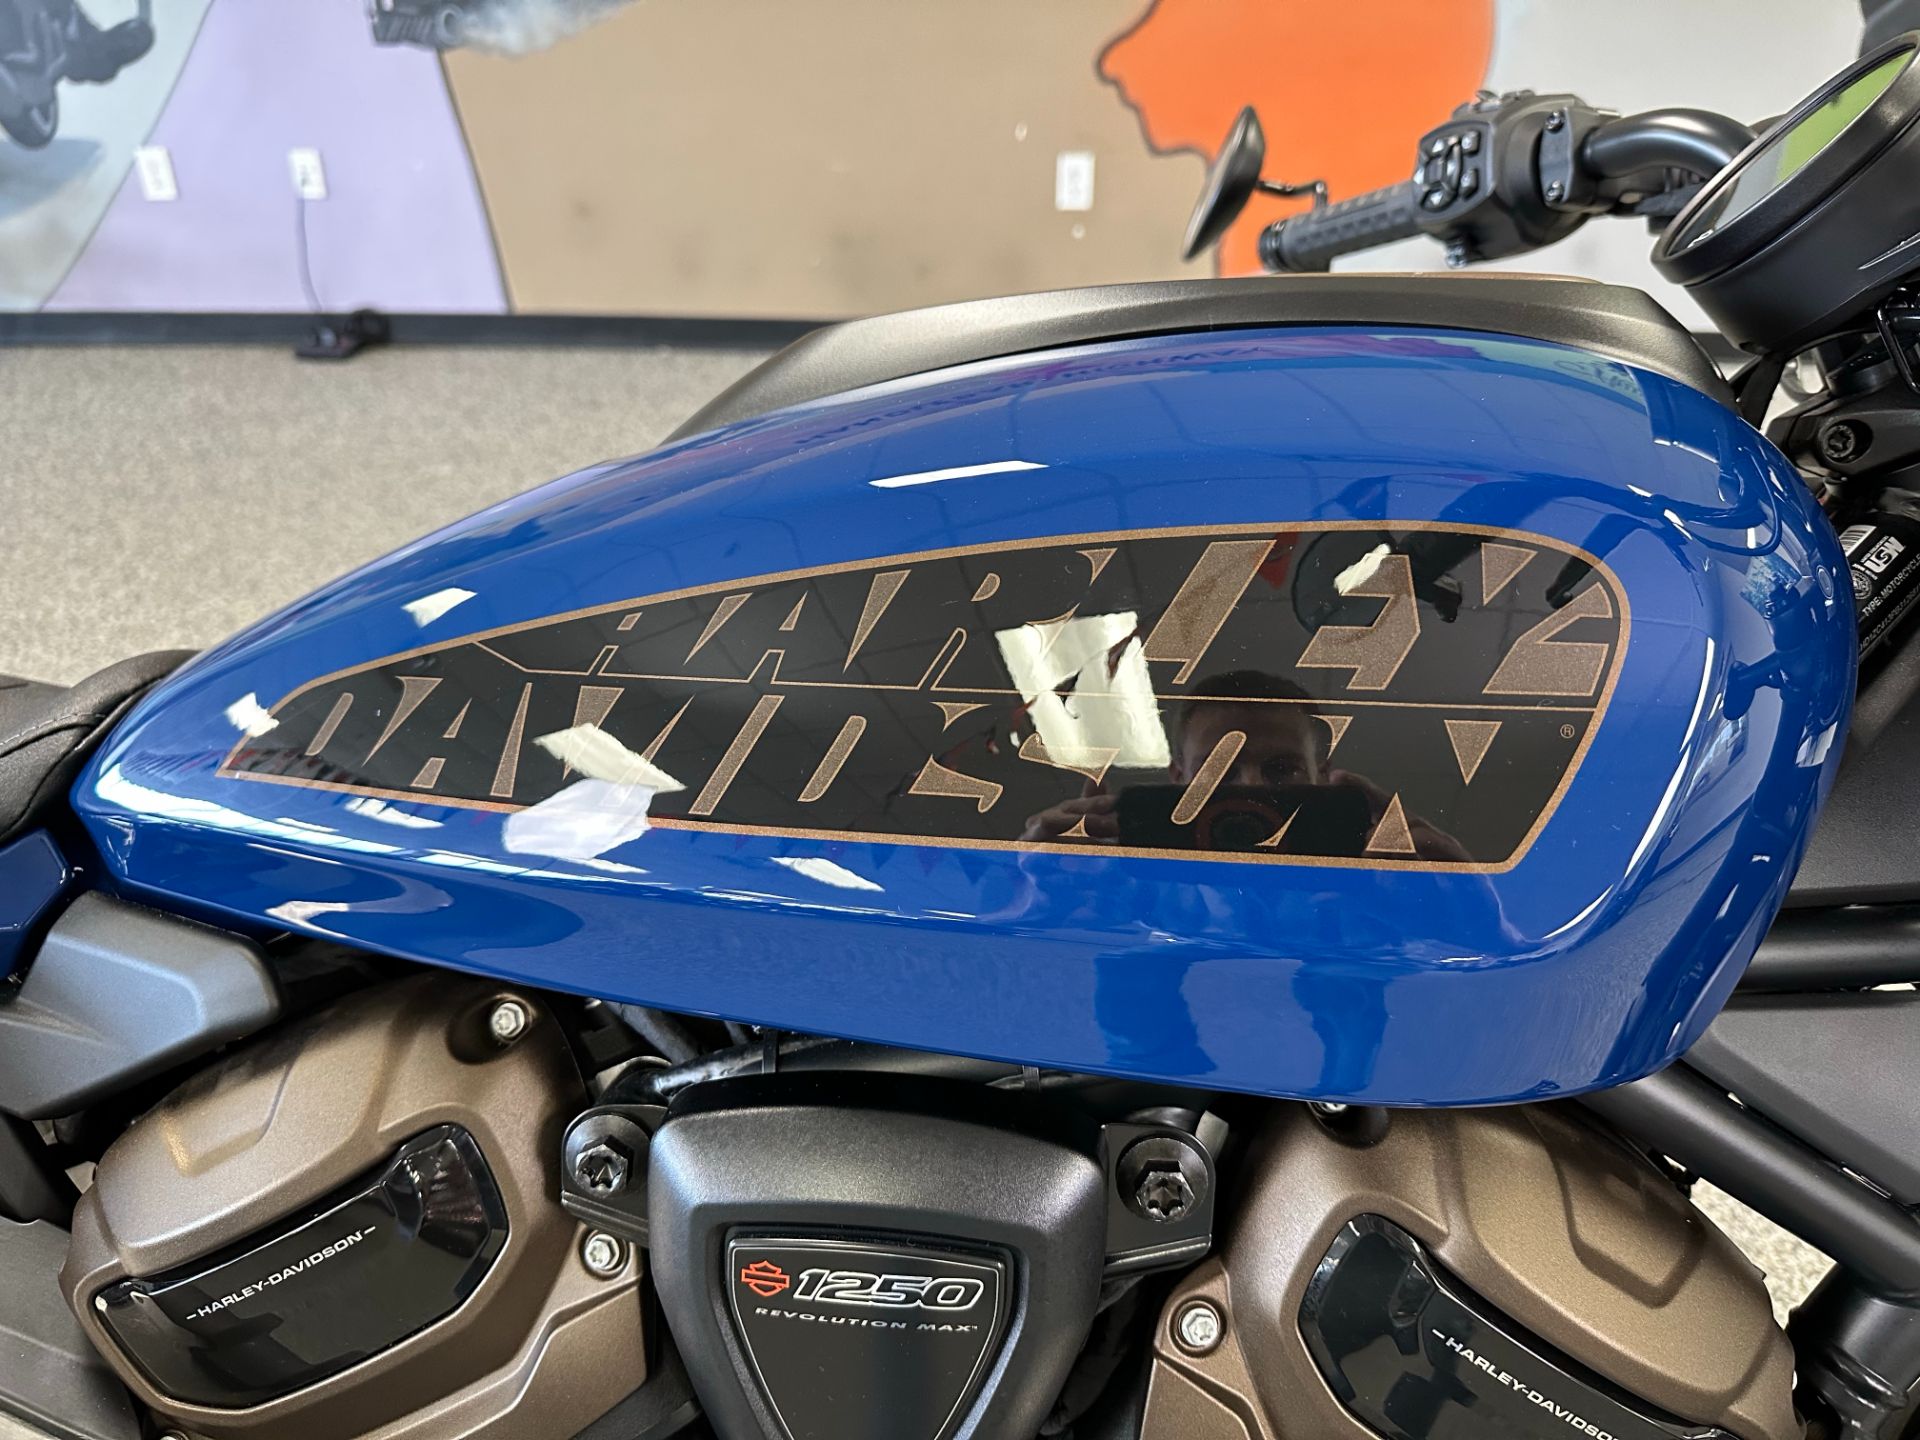 2023 Harley-Davidson Sportster® S in Knoxville, Tennessee - Photo 7